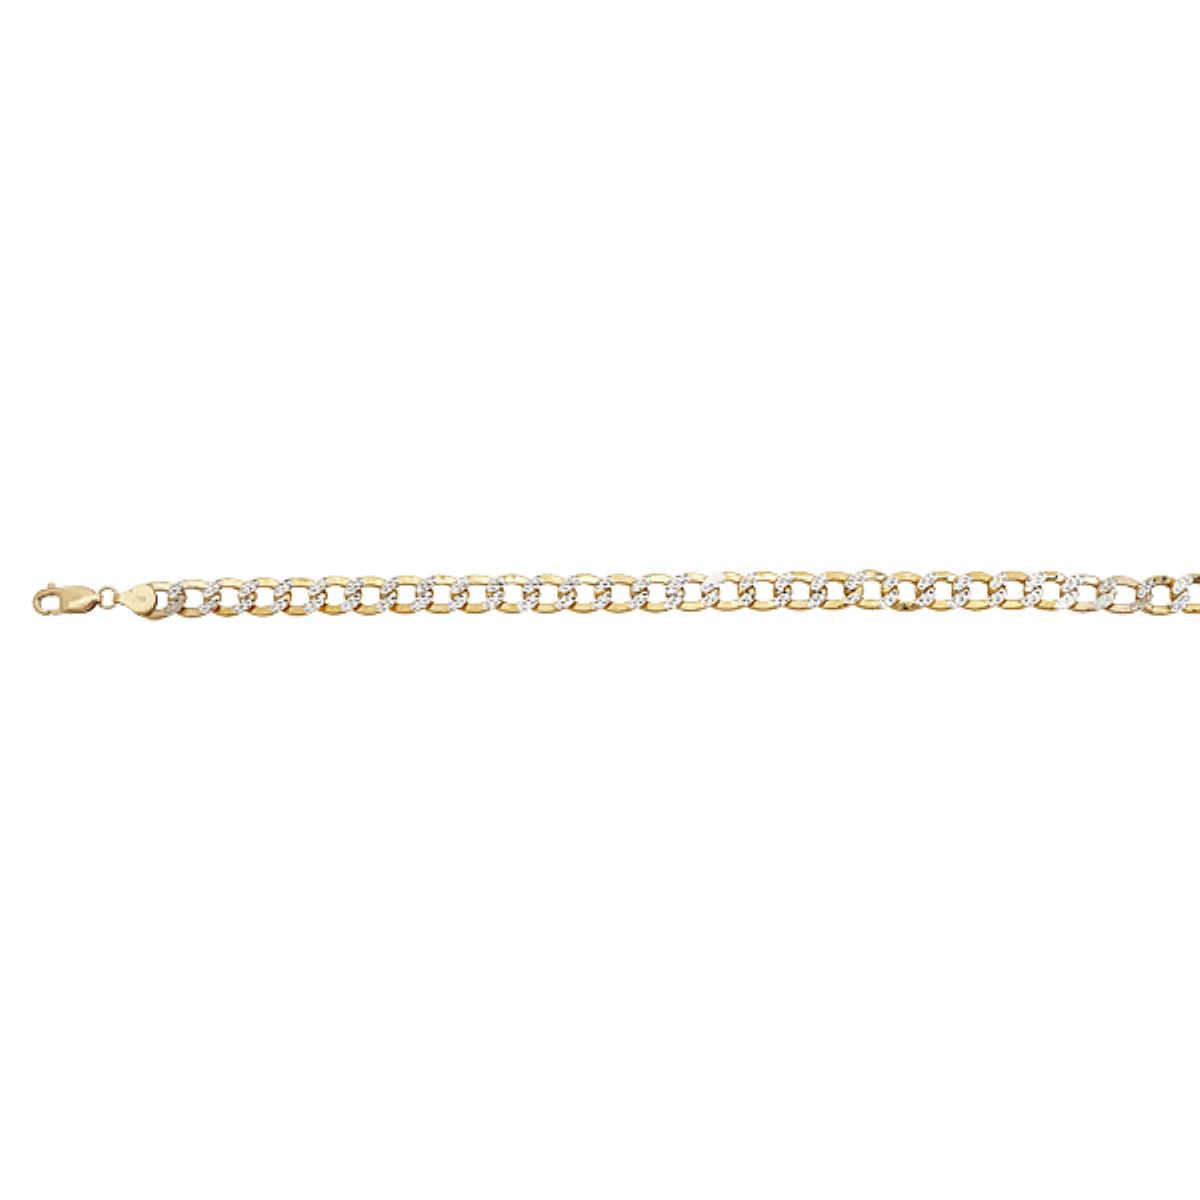 10K Yellow Gold 180 Hollow Cuban White Pave 24" Chain